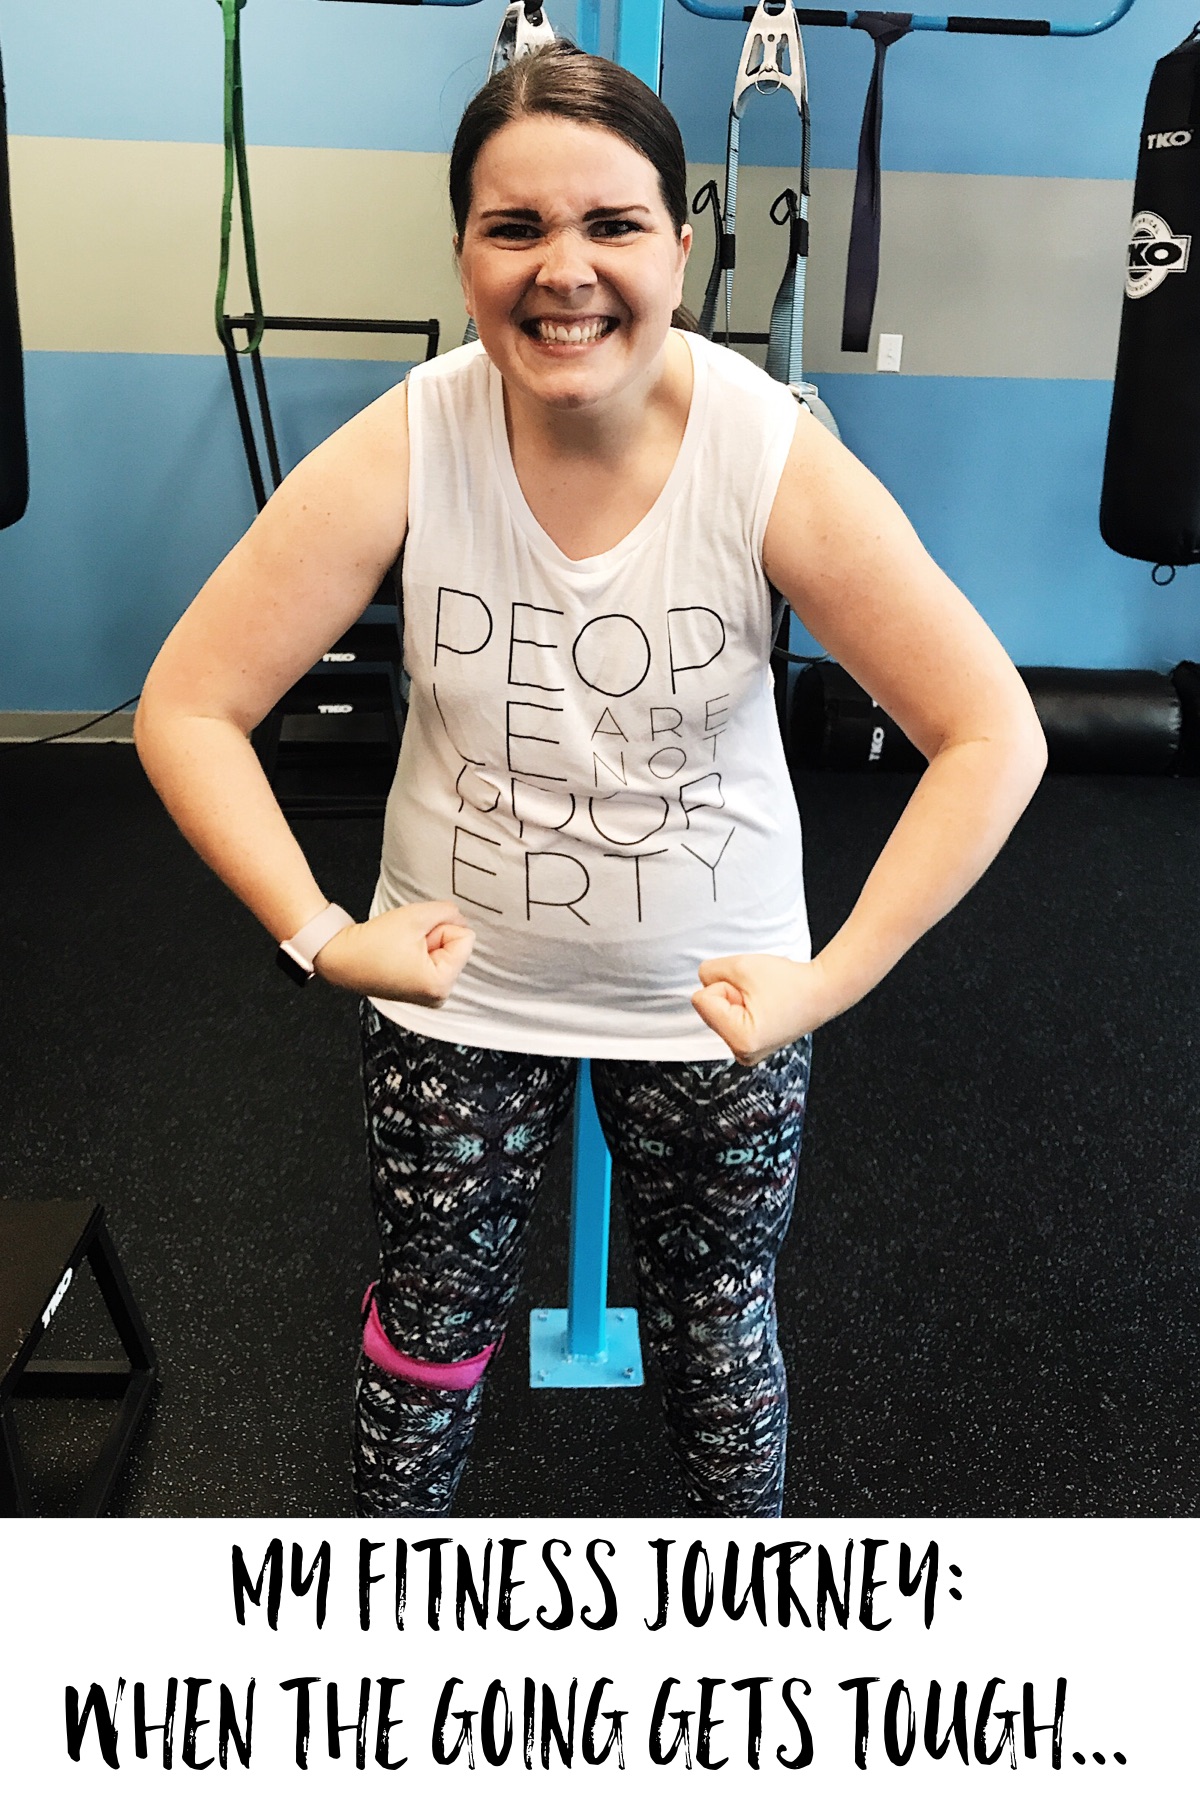 My Fitness Journey - When the Going Gets Tough by popular North Carolina blogger Still Being Molly